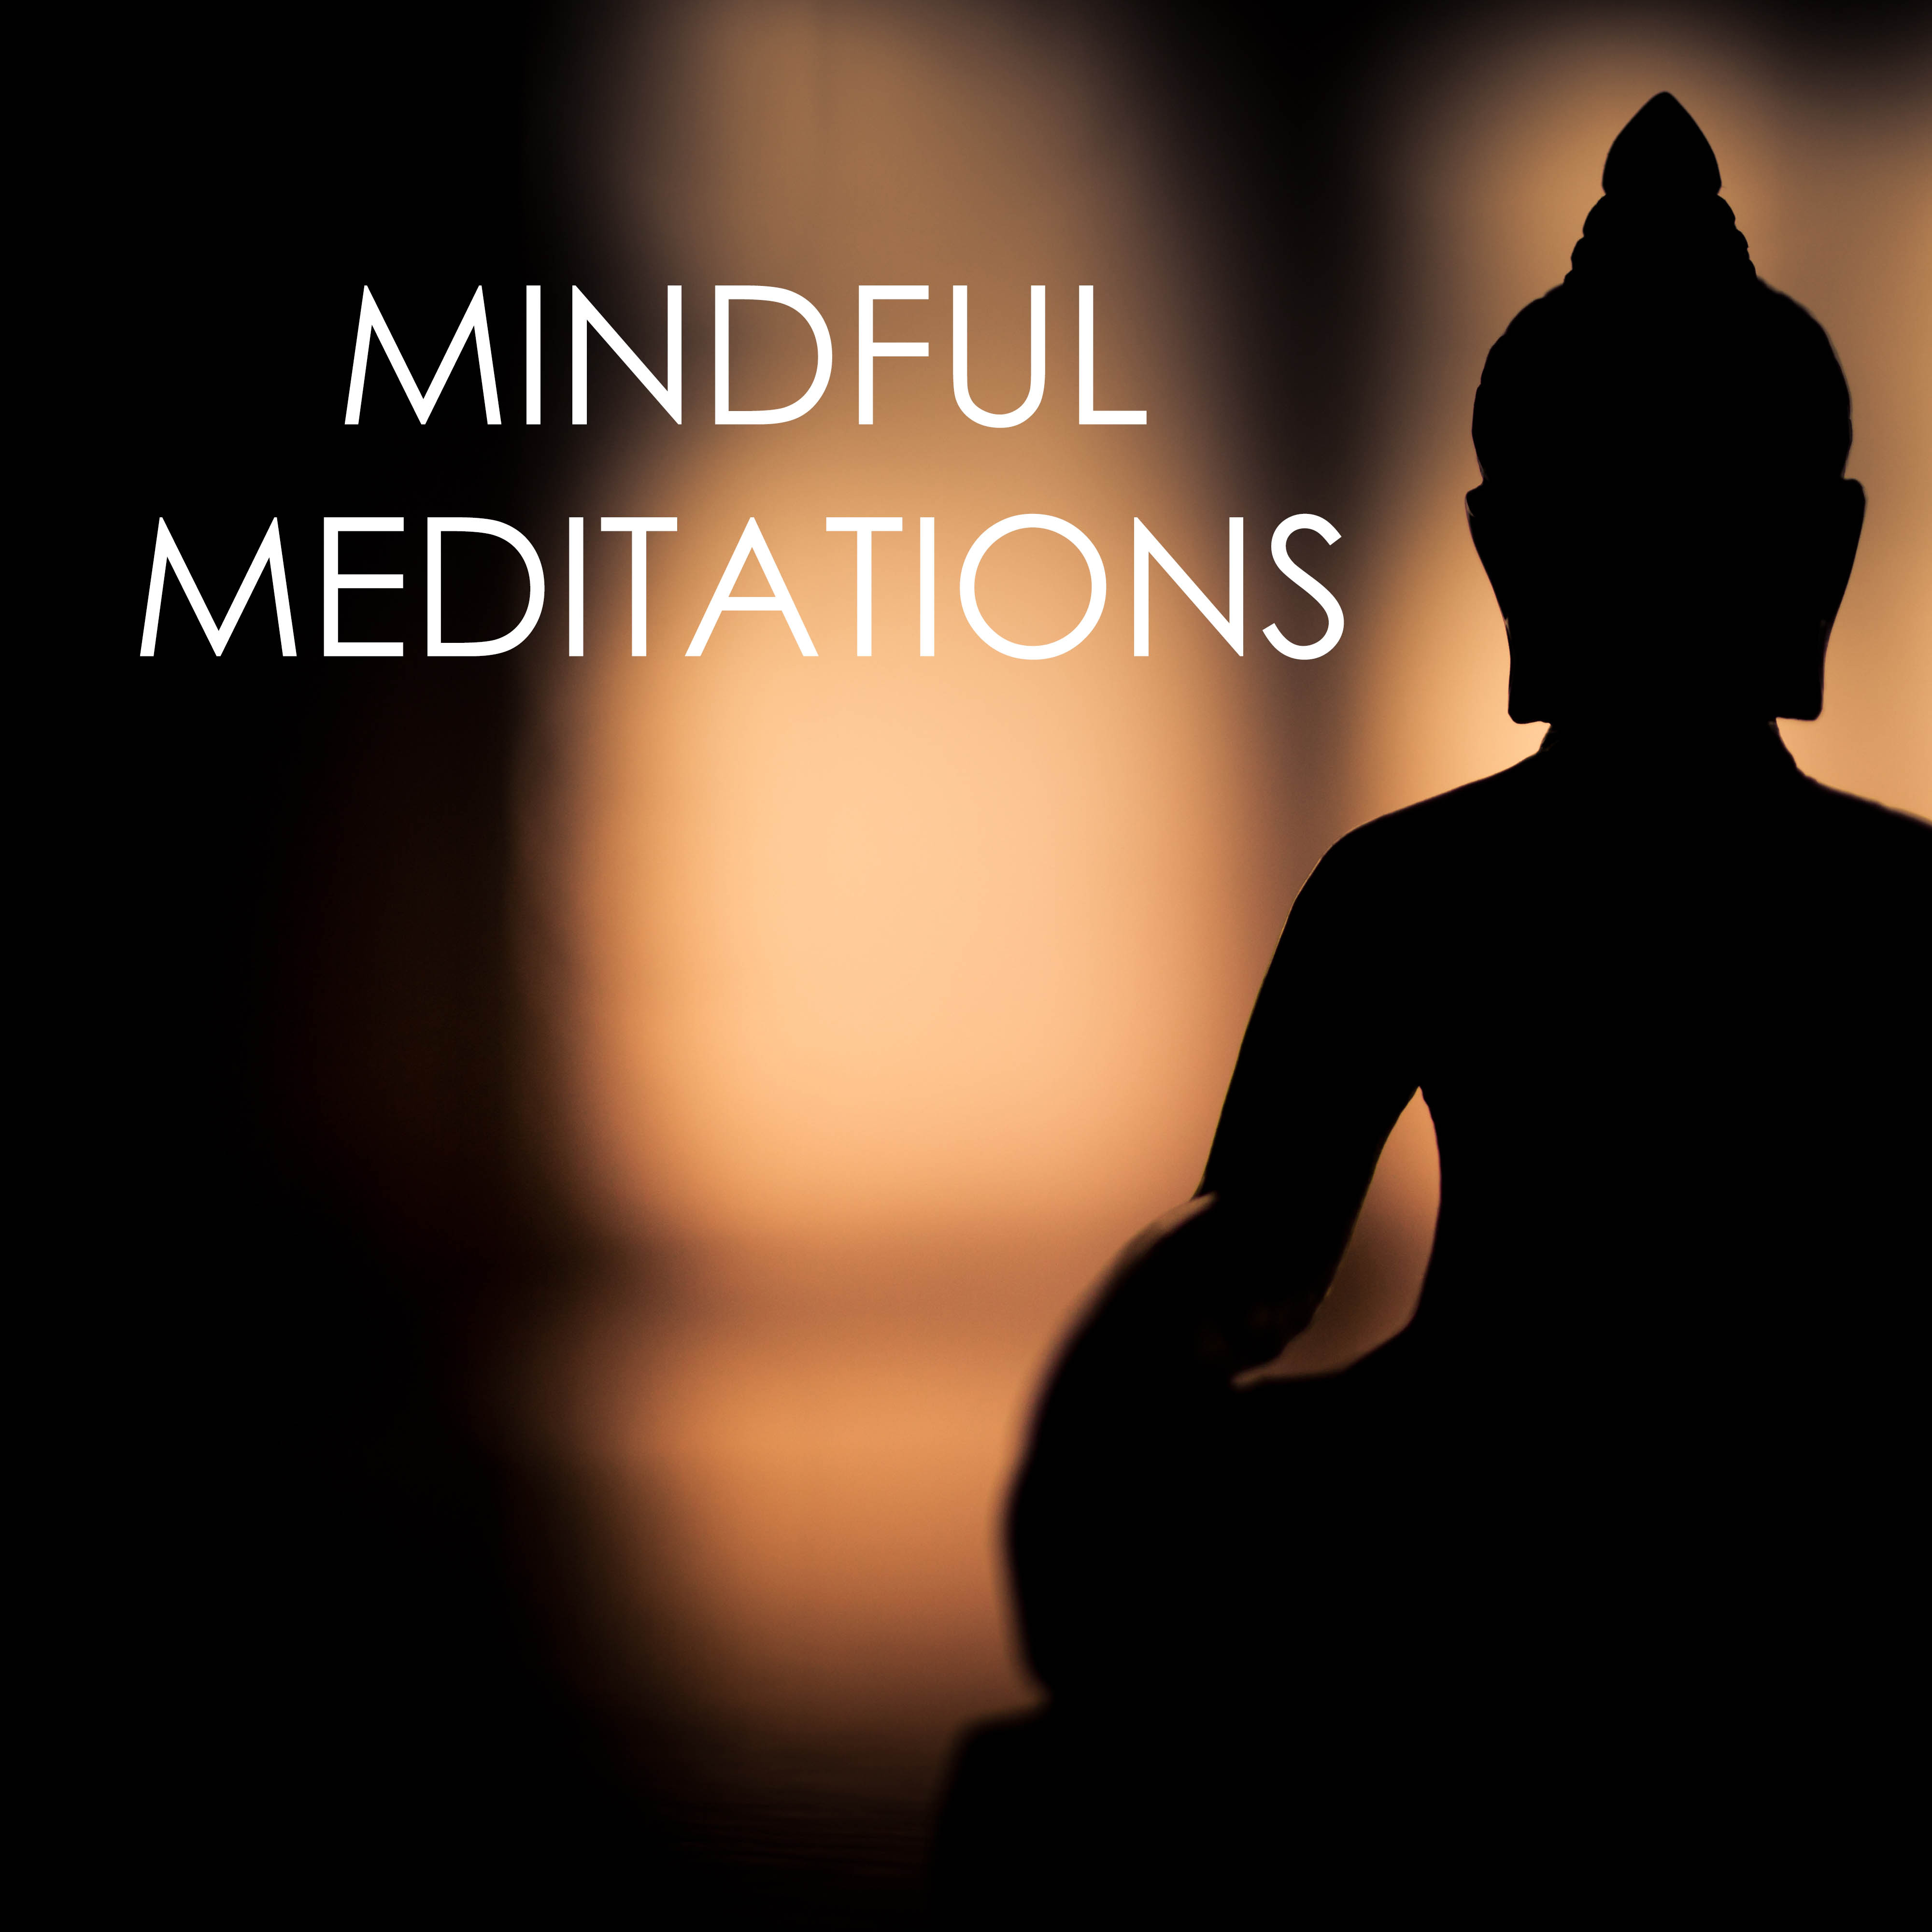 Mindful Meditations - Relaxing Mindfulness Meditation Music to Meditate